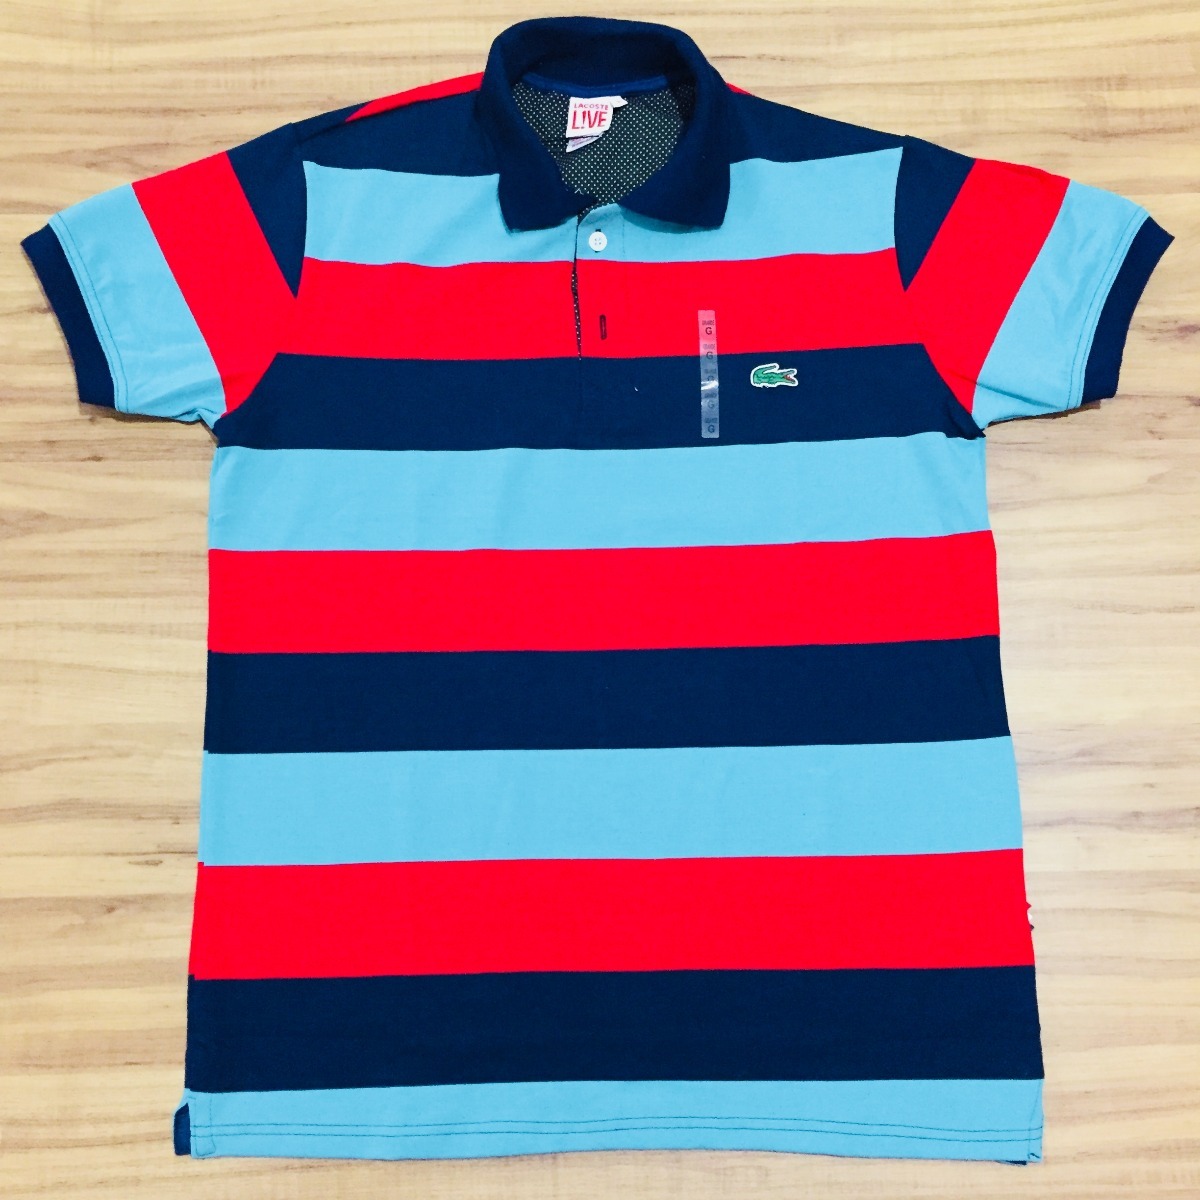 Camisa Polo Lacoste Piquet Slim Fit Masculina Compre